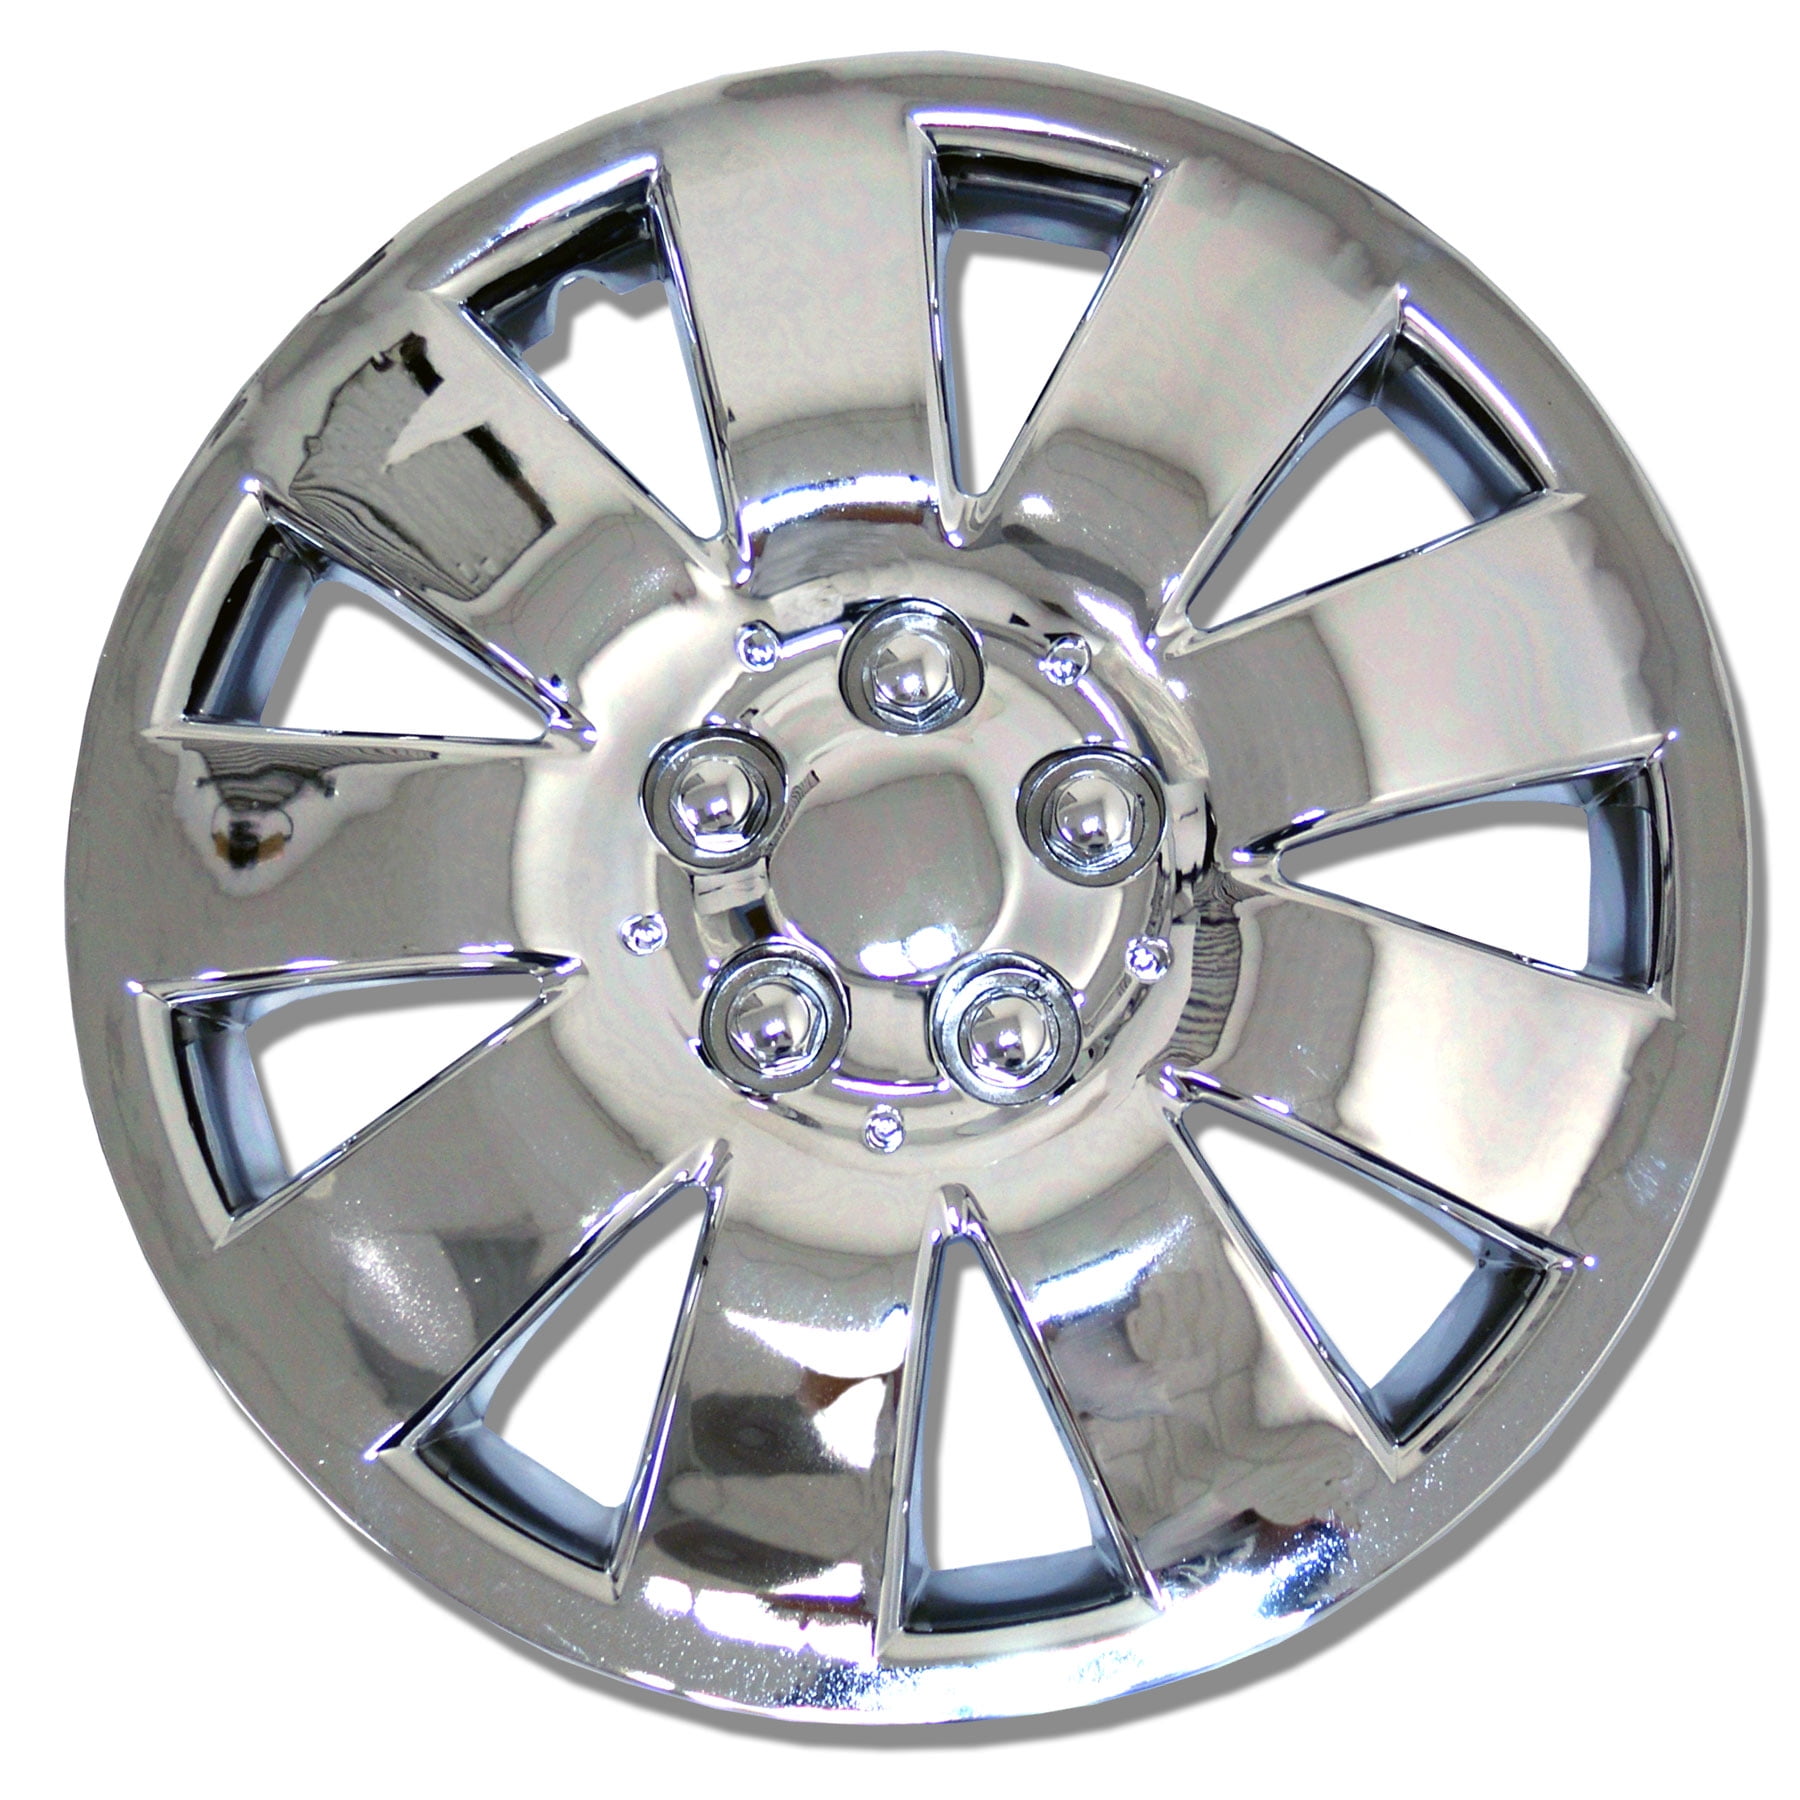 Details about   17" Inches Hubcap Style#721-4pcs Set of 17 inch Wheel Rim Skin Cover Hub caps 